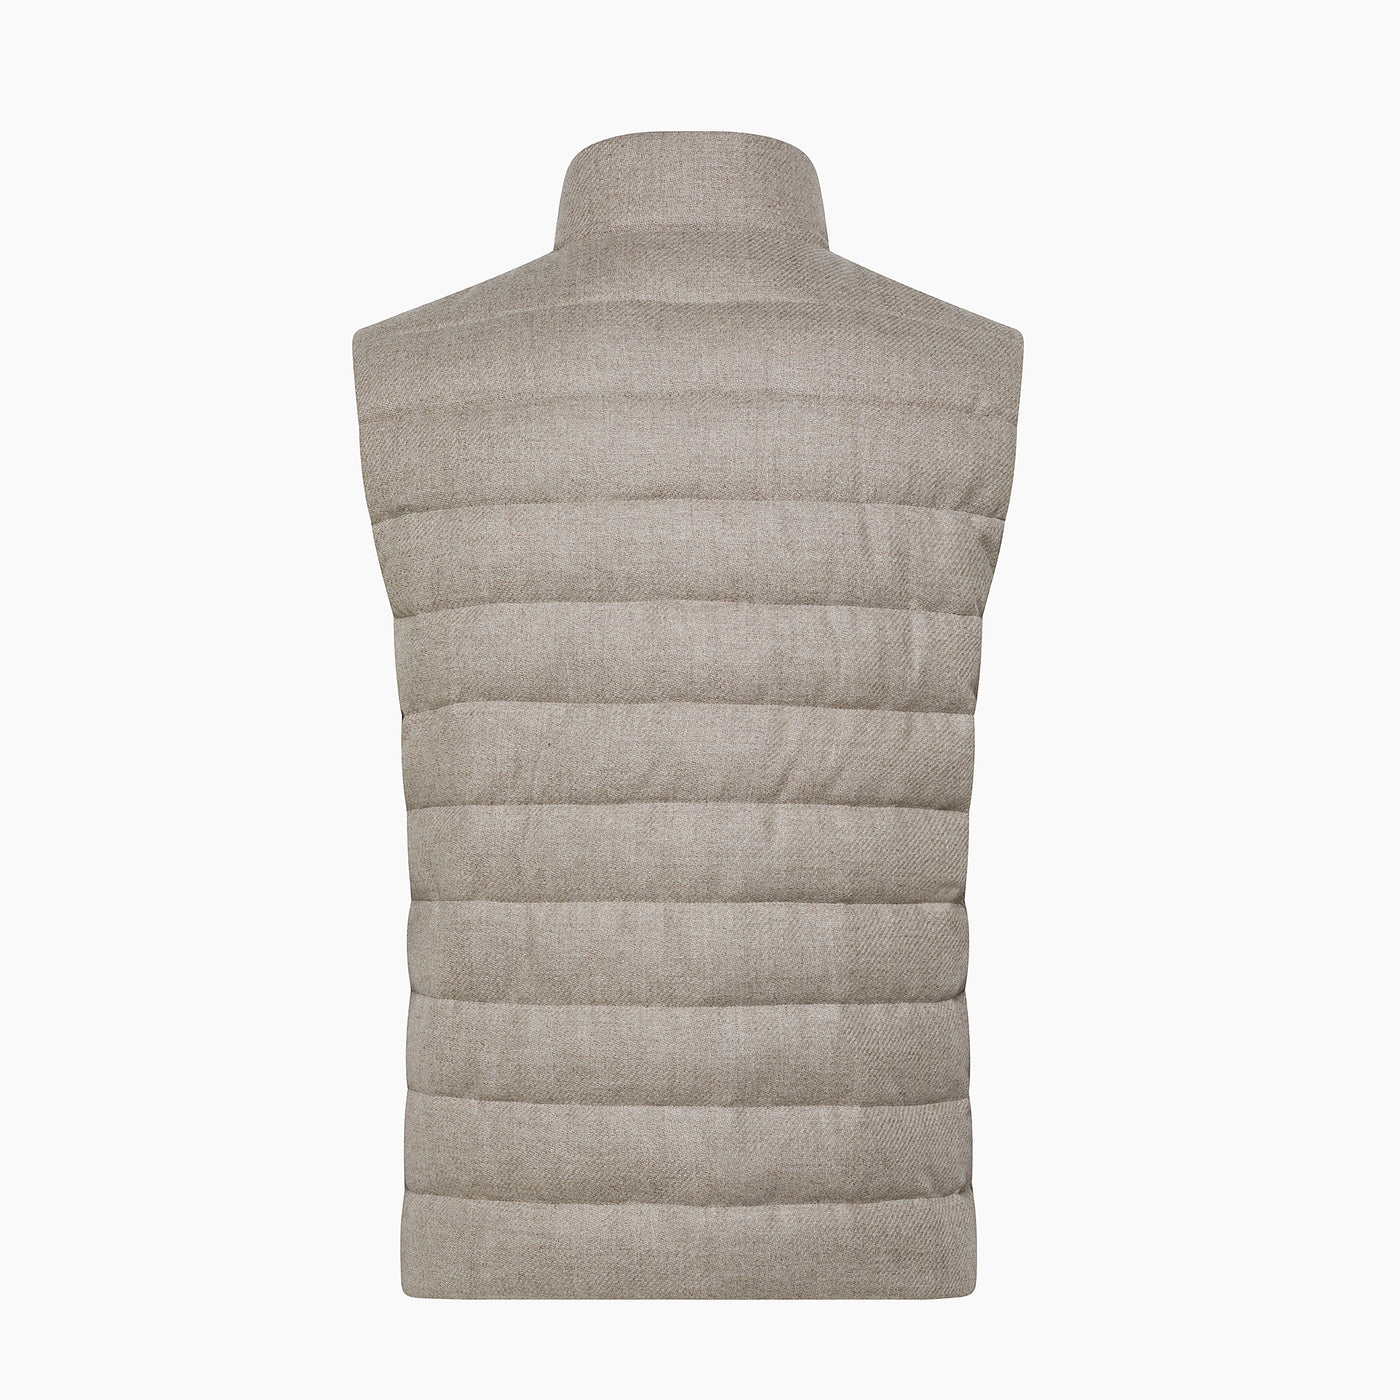 Sow Wool and Down padded Vest